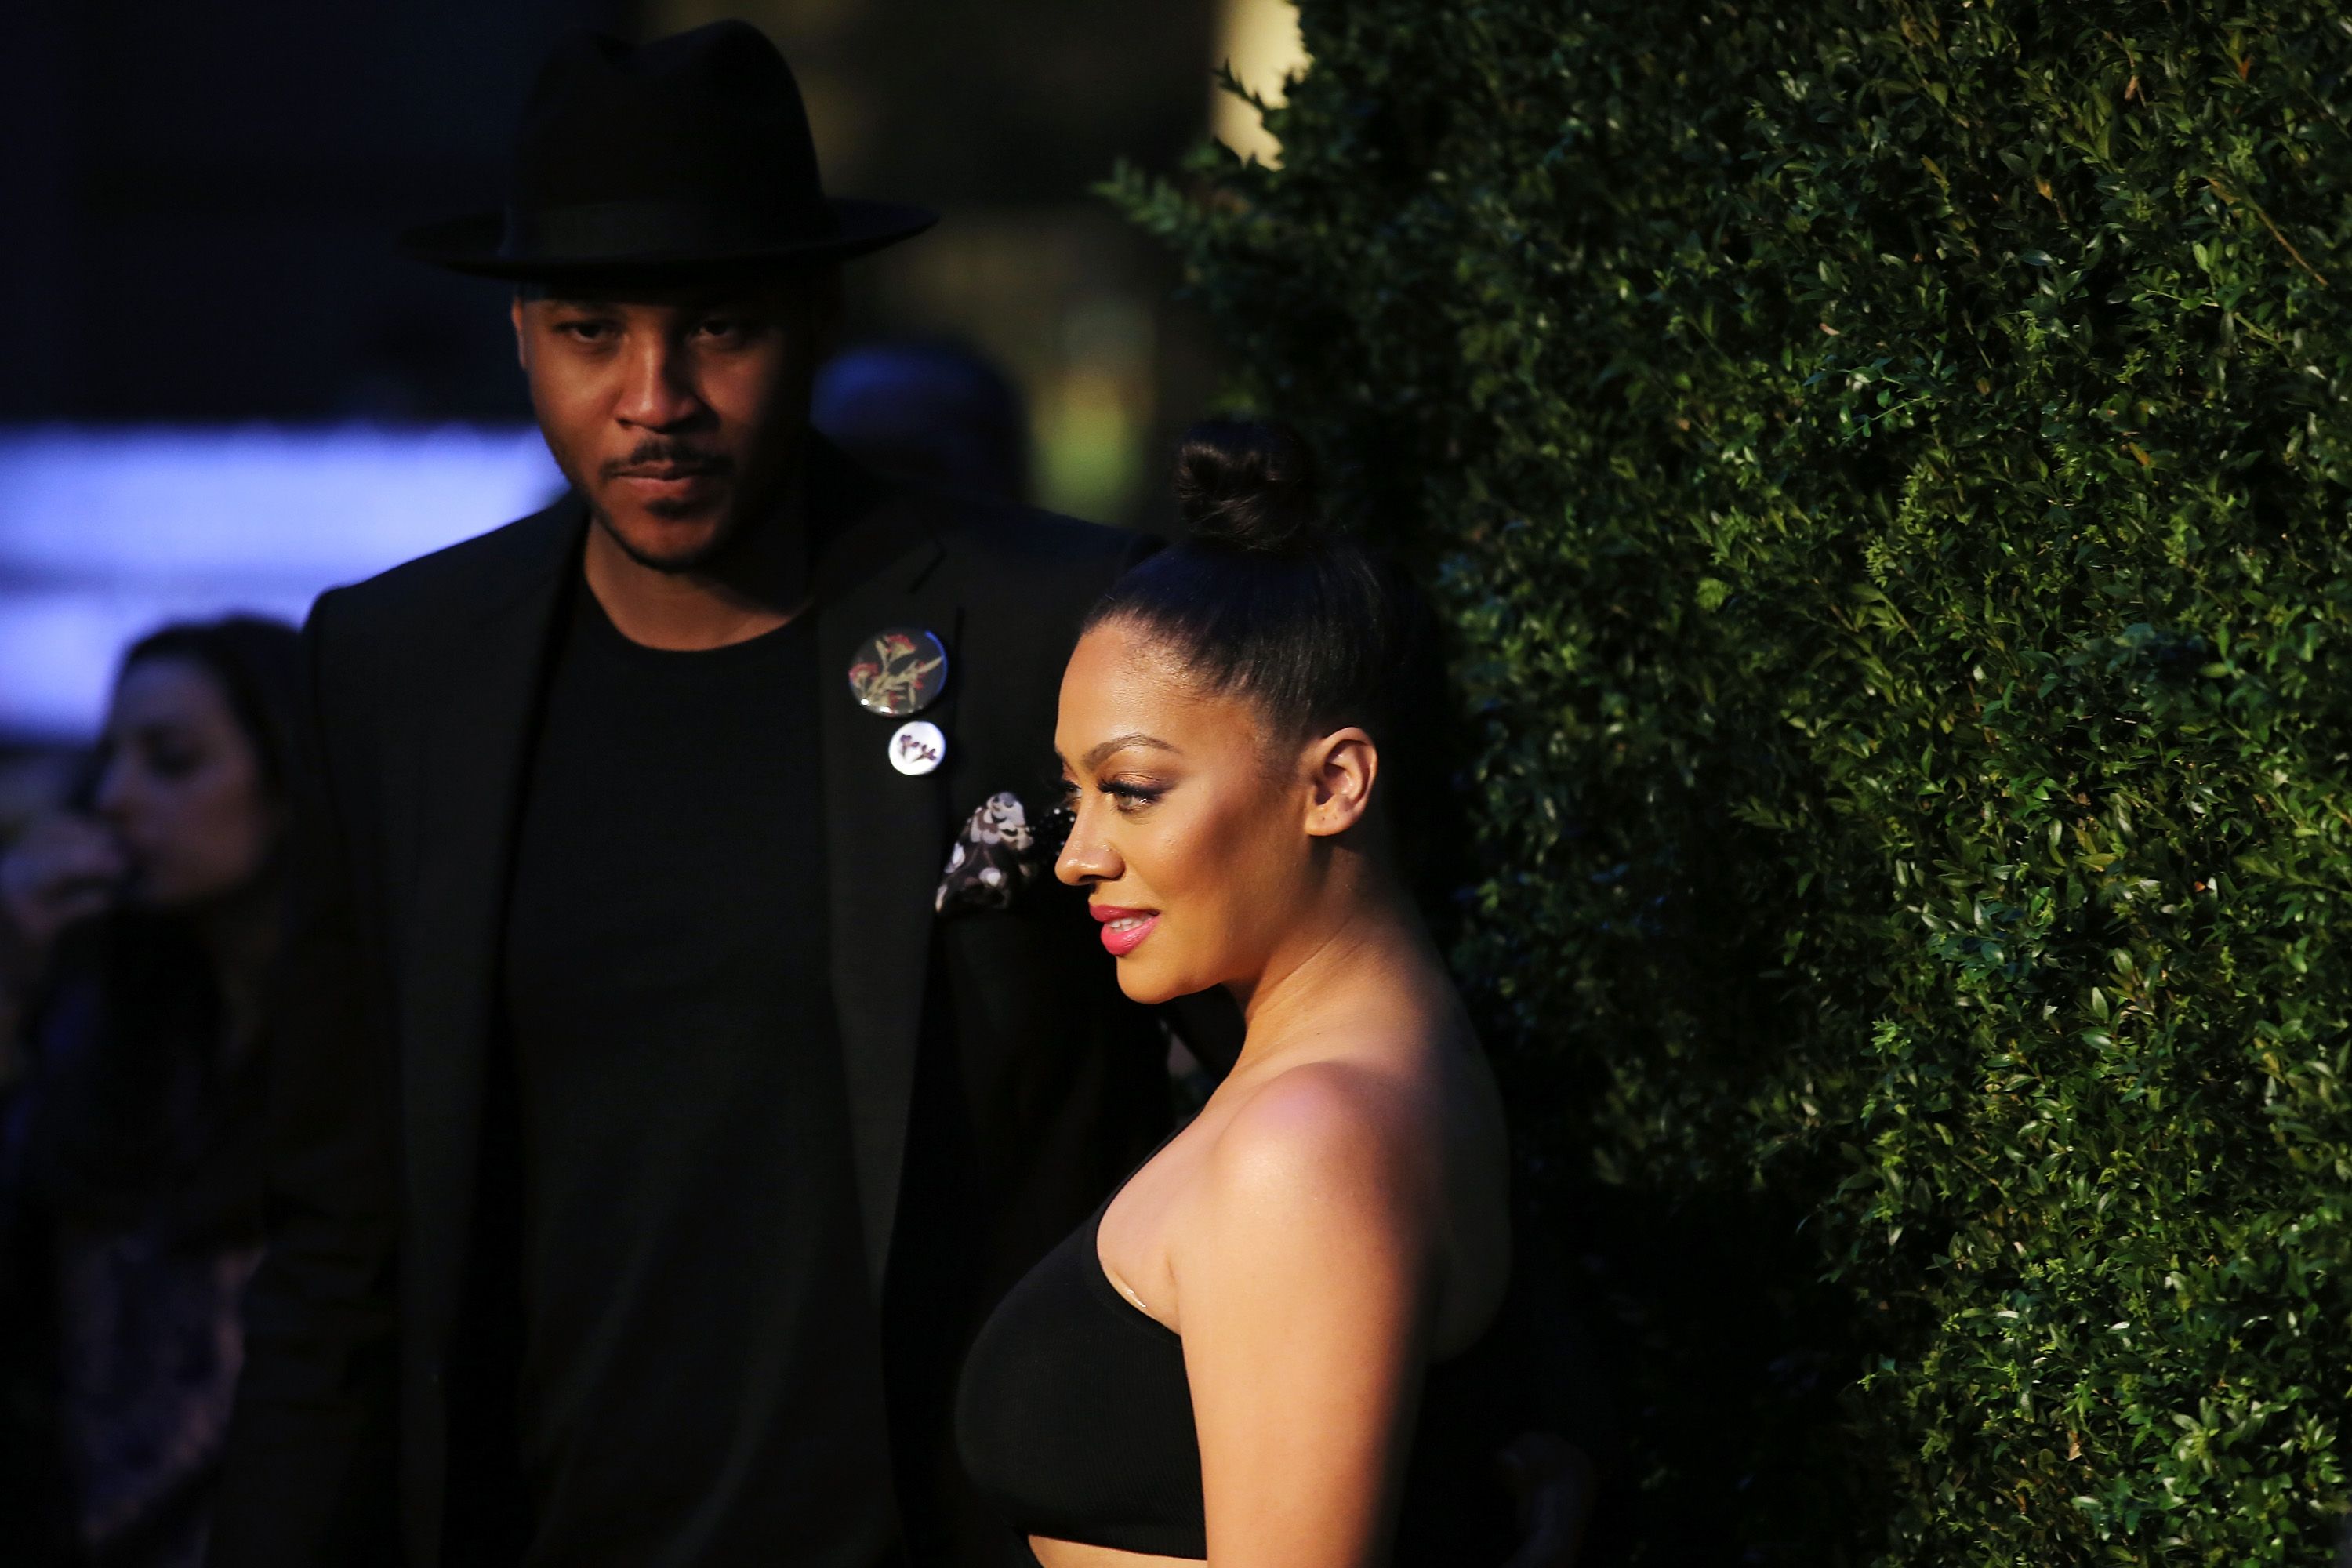 Carmelo Anthony and La La Anthony attend the 11th Annual Chanel Tribeca Film Festival Artists Dinner at Balthazar on April 18, 2016 in New York City. | Source: Getty Images